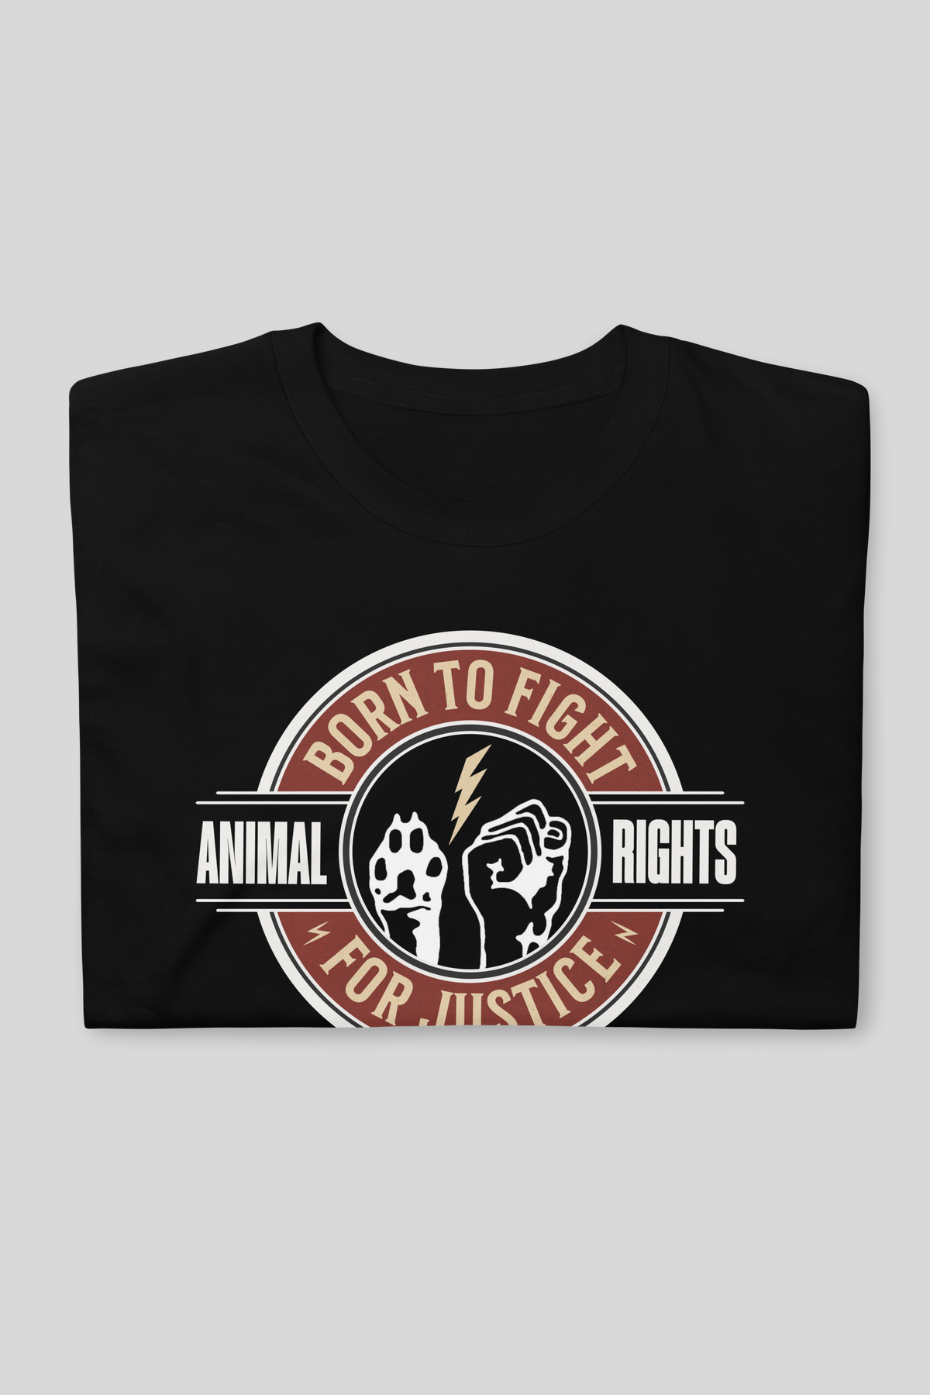 Born to Fight For Justice Unisex Basic T-Shirt